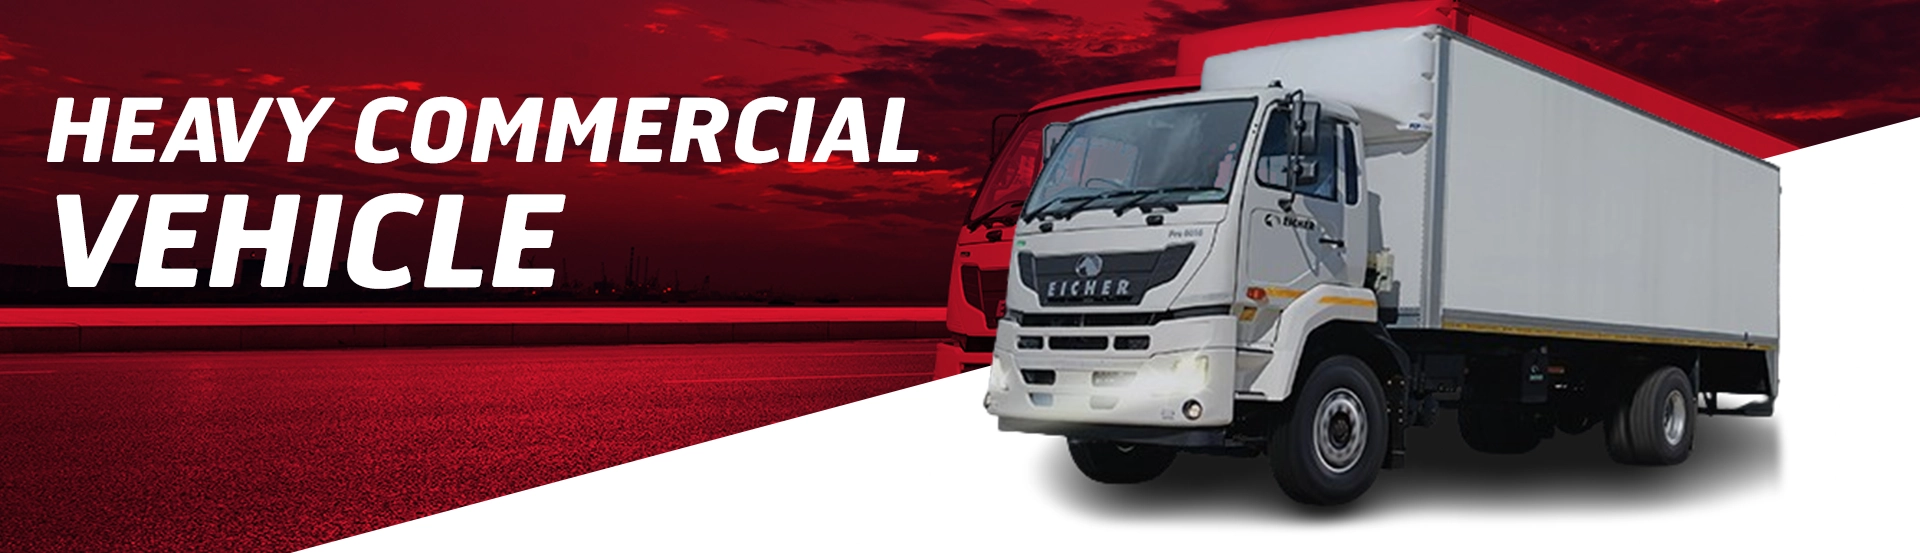 Myride Commercial Heavy Commercial Vehicle banner